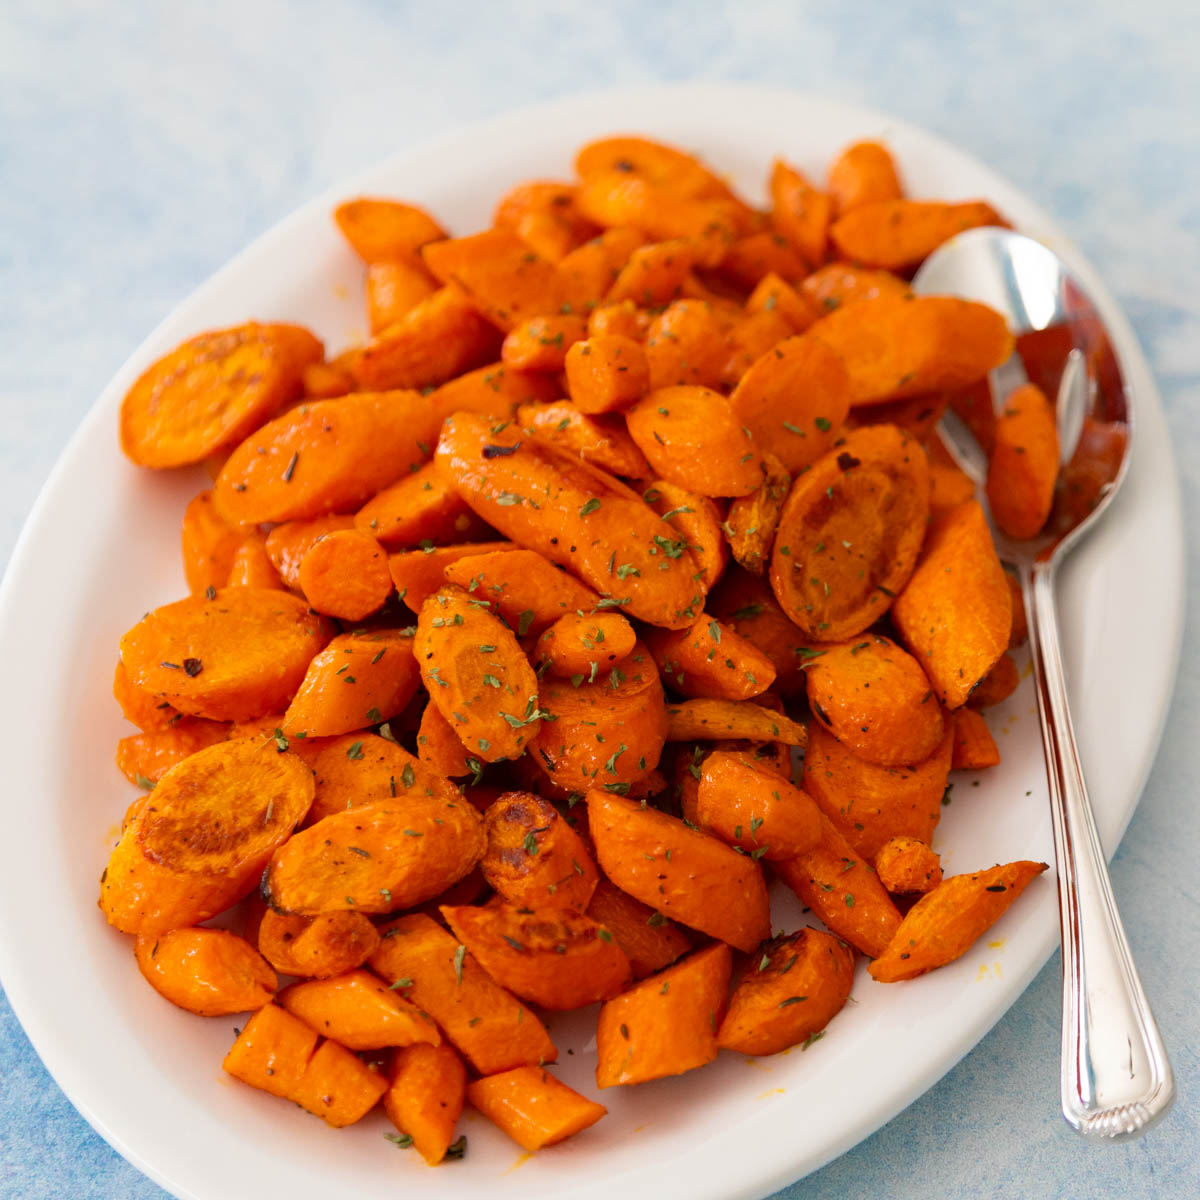 The oven roasted carrots have golden brown edges and are being served on a white platter with a serving spoon.